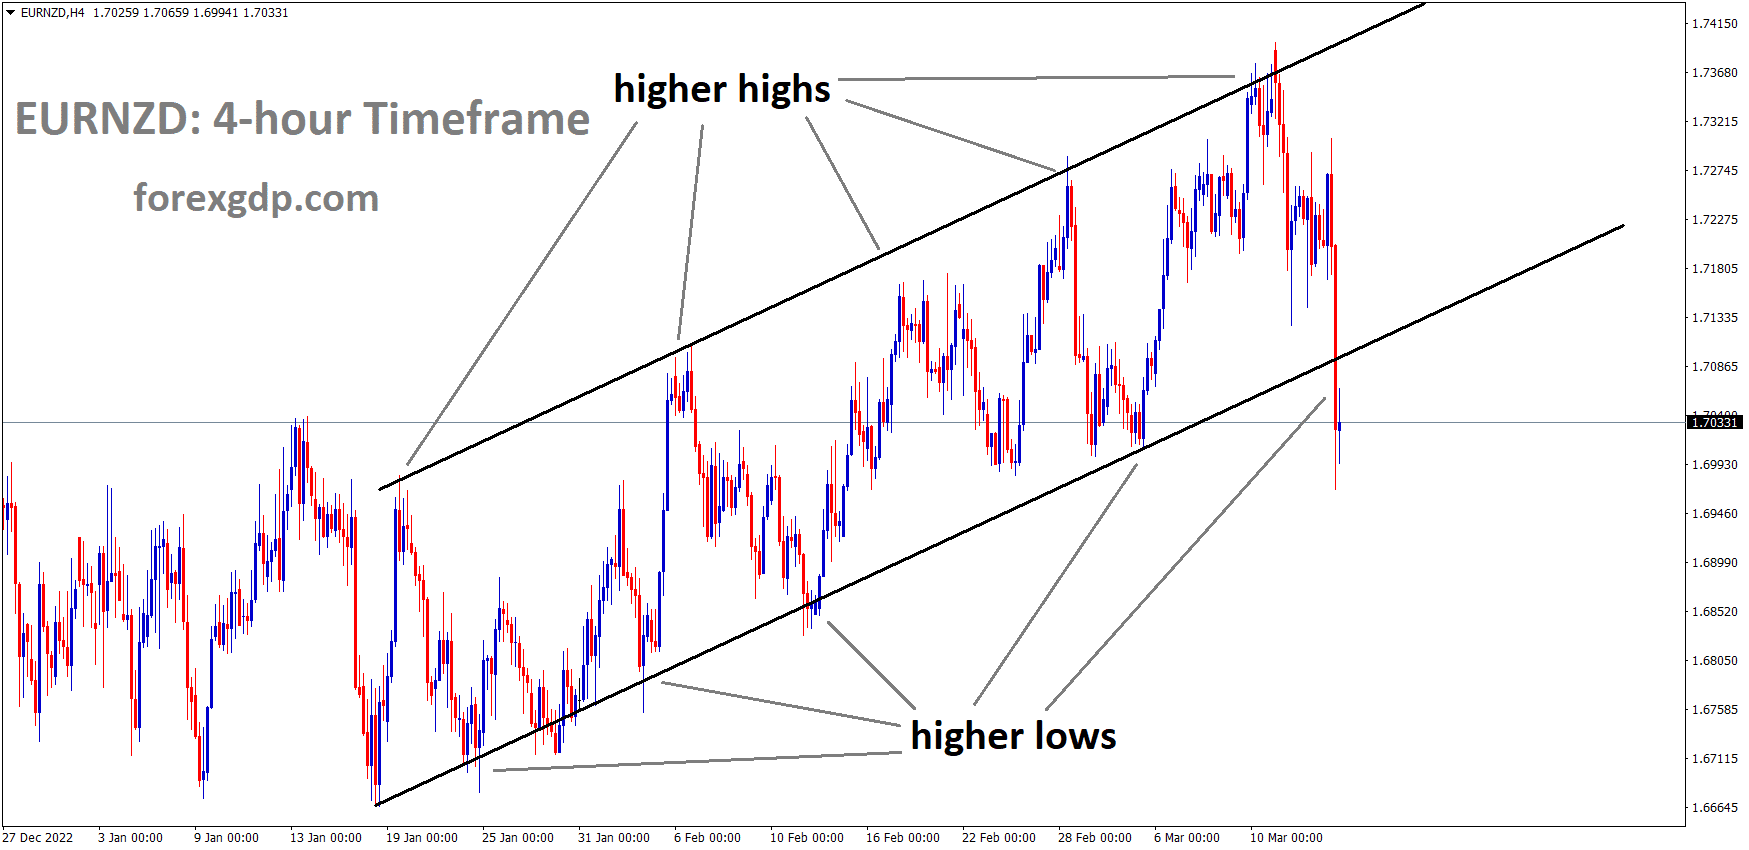 EURNZD H4 TF analysis Market is moving in an Ascending channel and the market has reached the higher low area of the channel